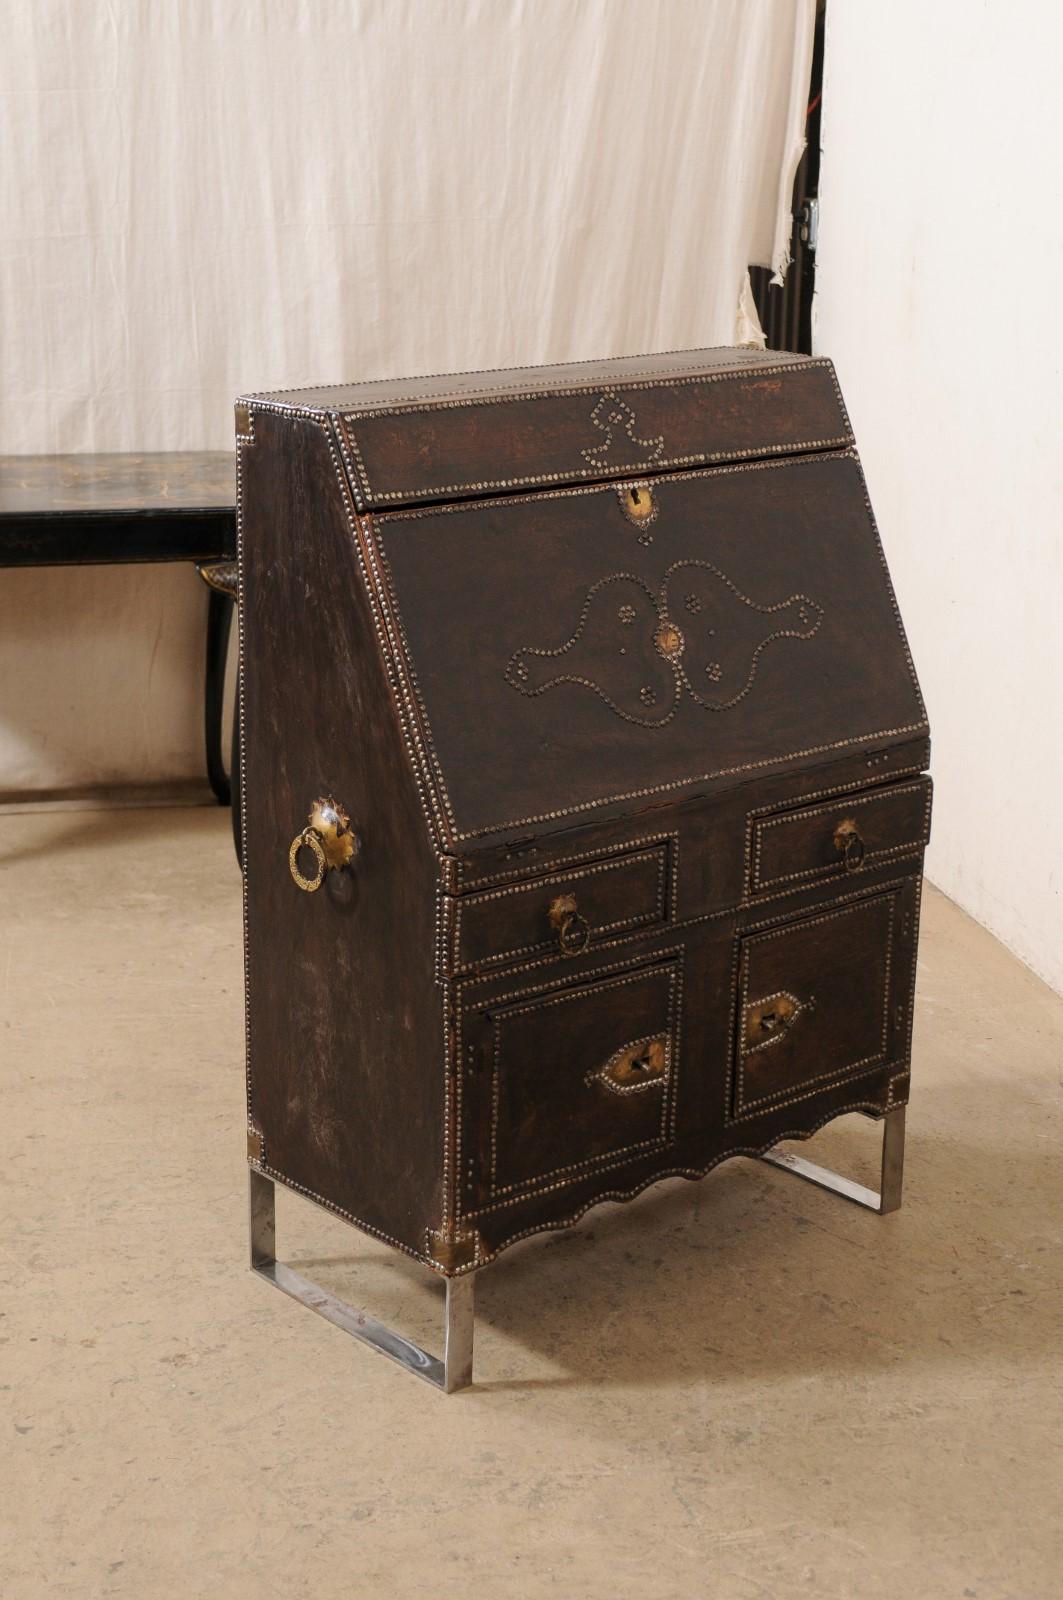 A 19th century Spanish secretary desk, on custom iron base. This antique case piece from Spain has a leather-wrapped exterior which is adorn in nail-head accents, original iron hardware, and nicely scalloped skirt at front. When the fall-front is